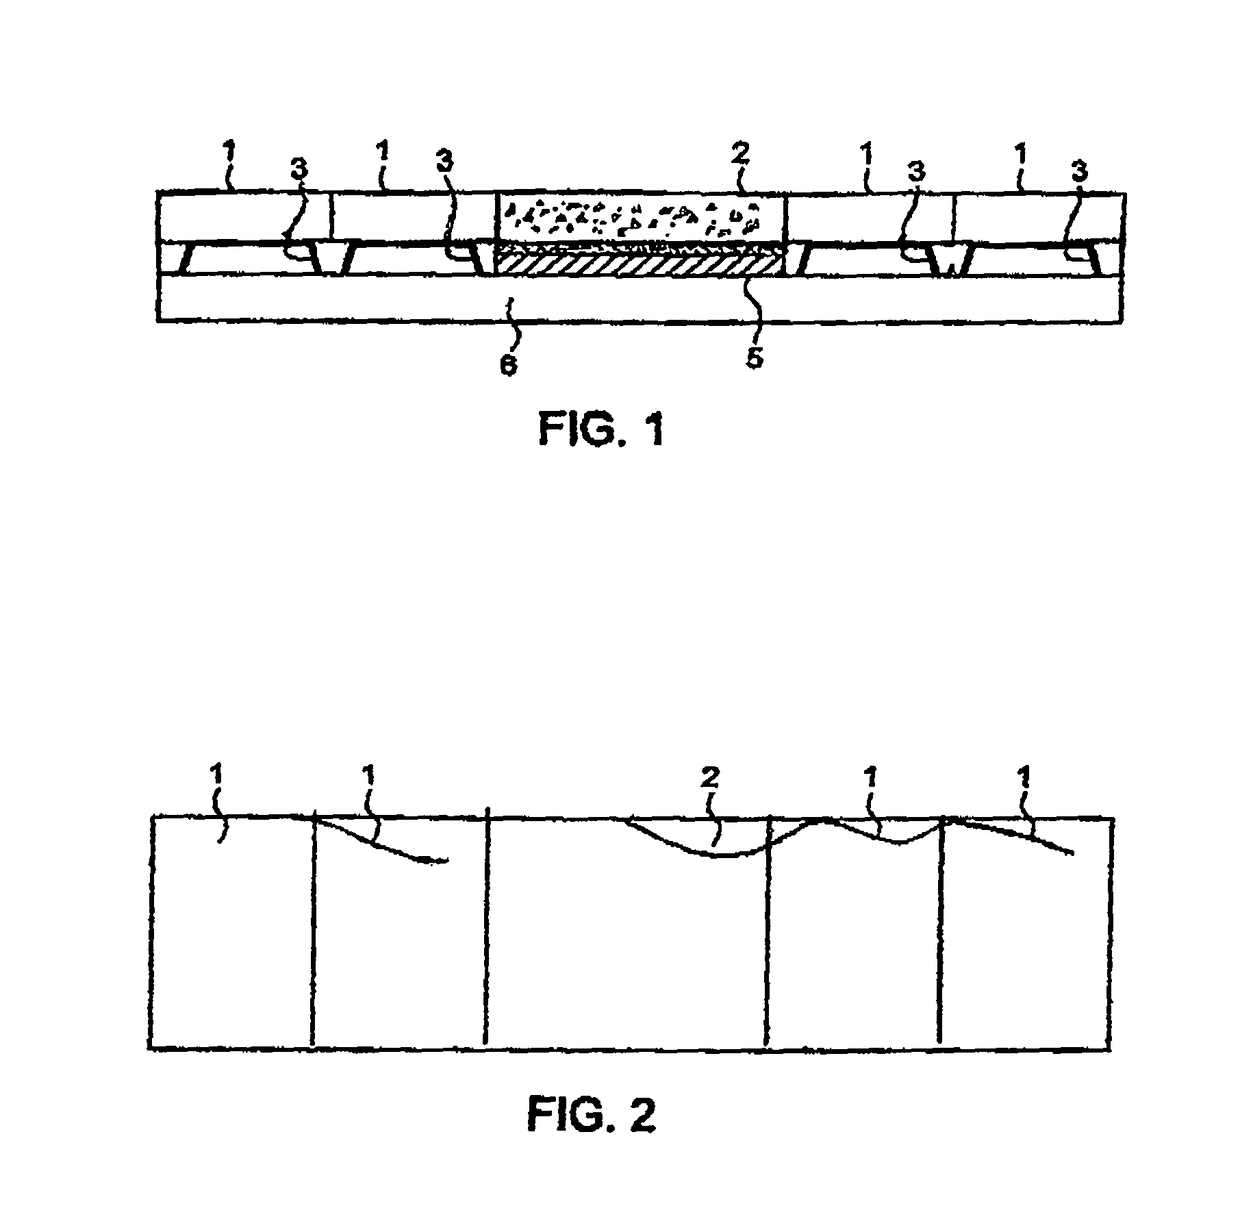 Launch pad flame deflector structure and method of making the same